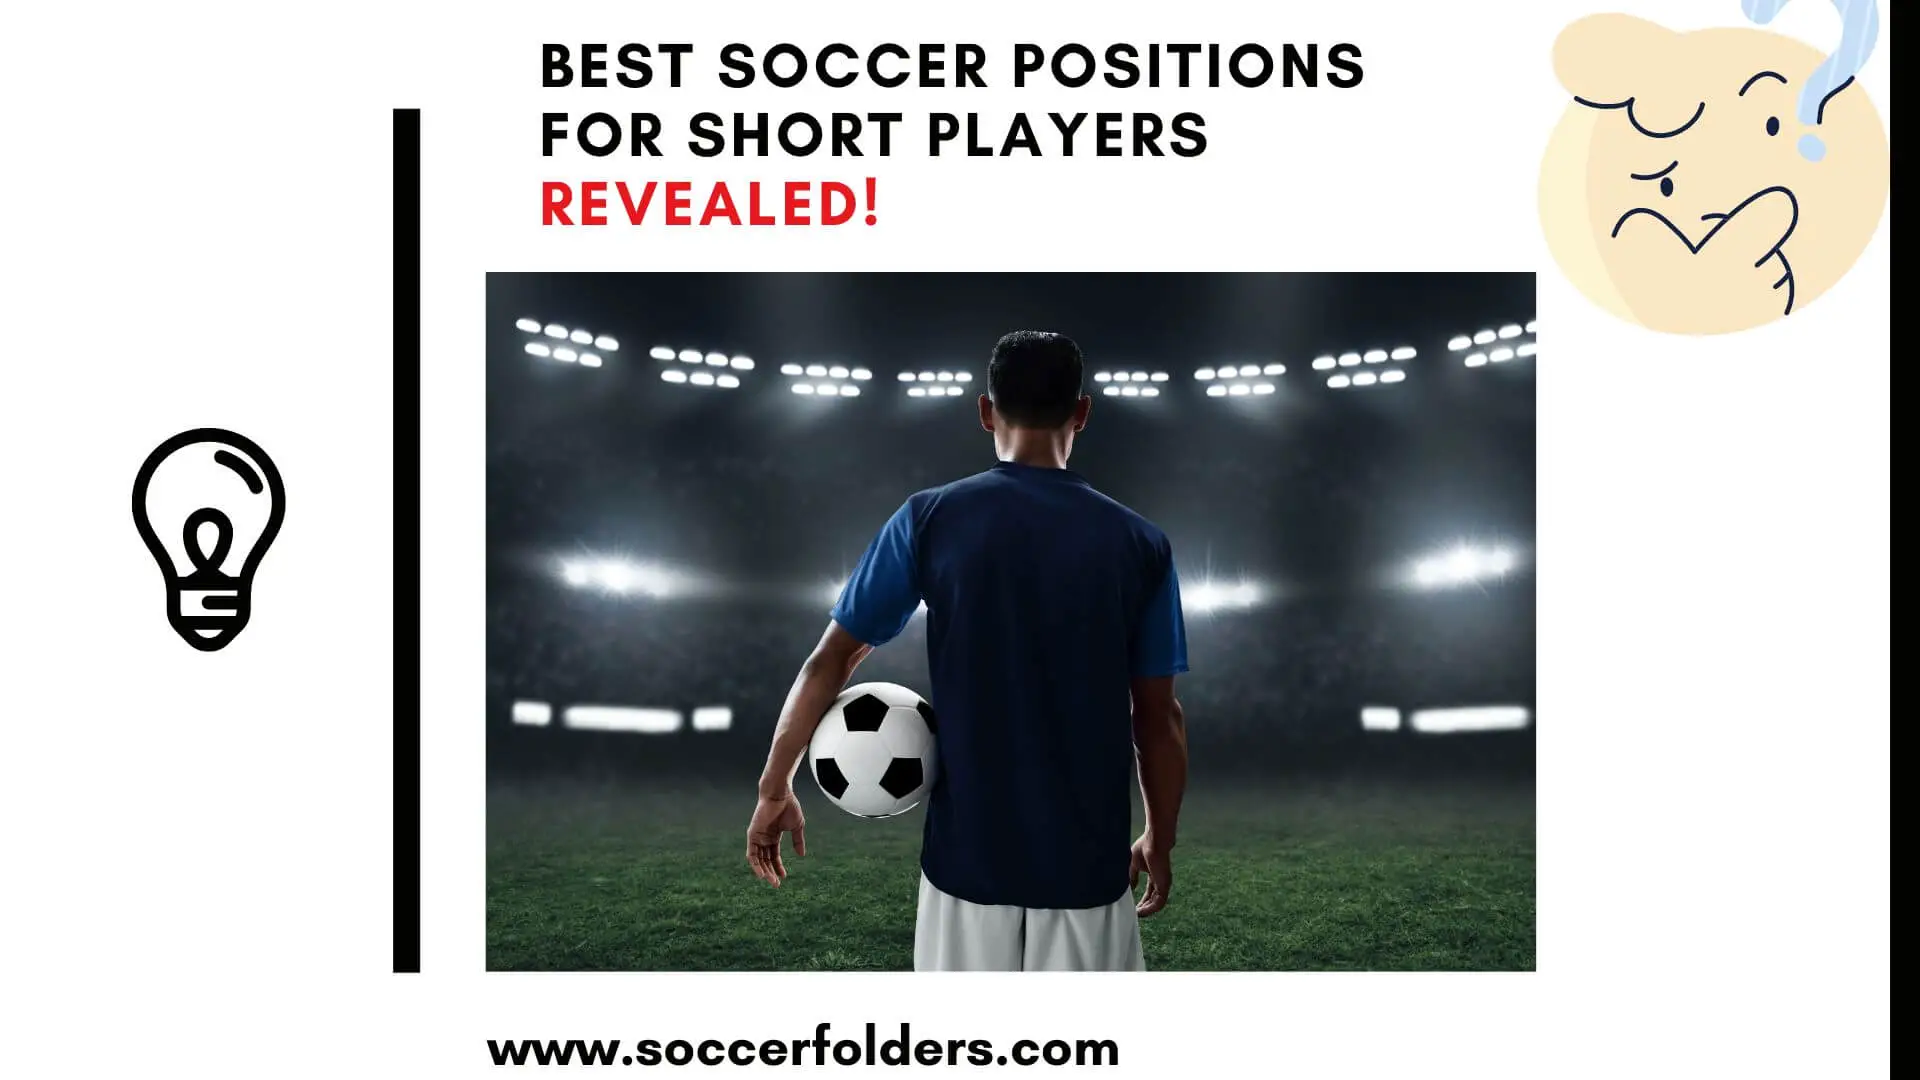 Best soccer positions for short players - Featured image